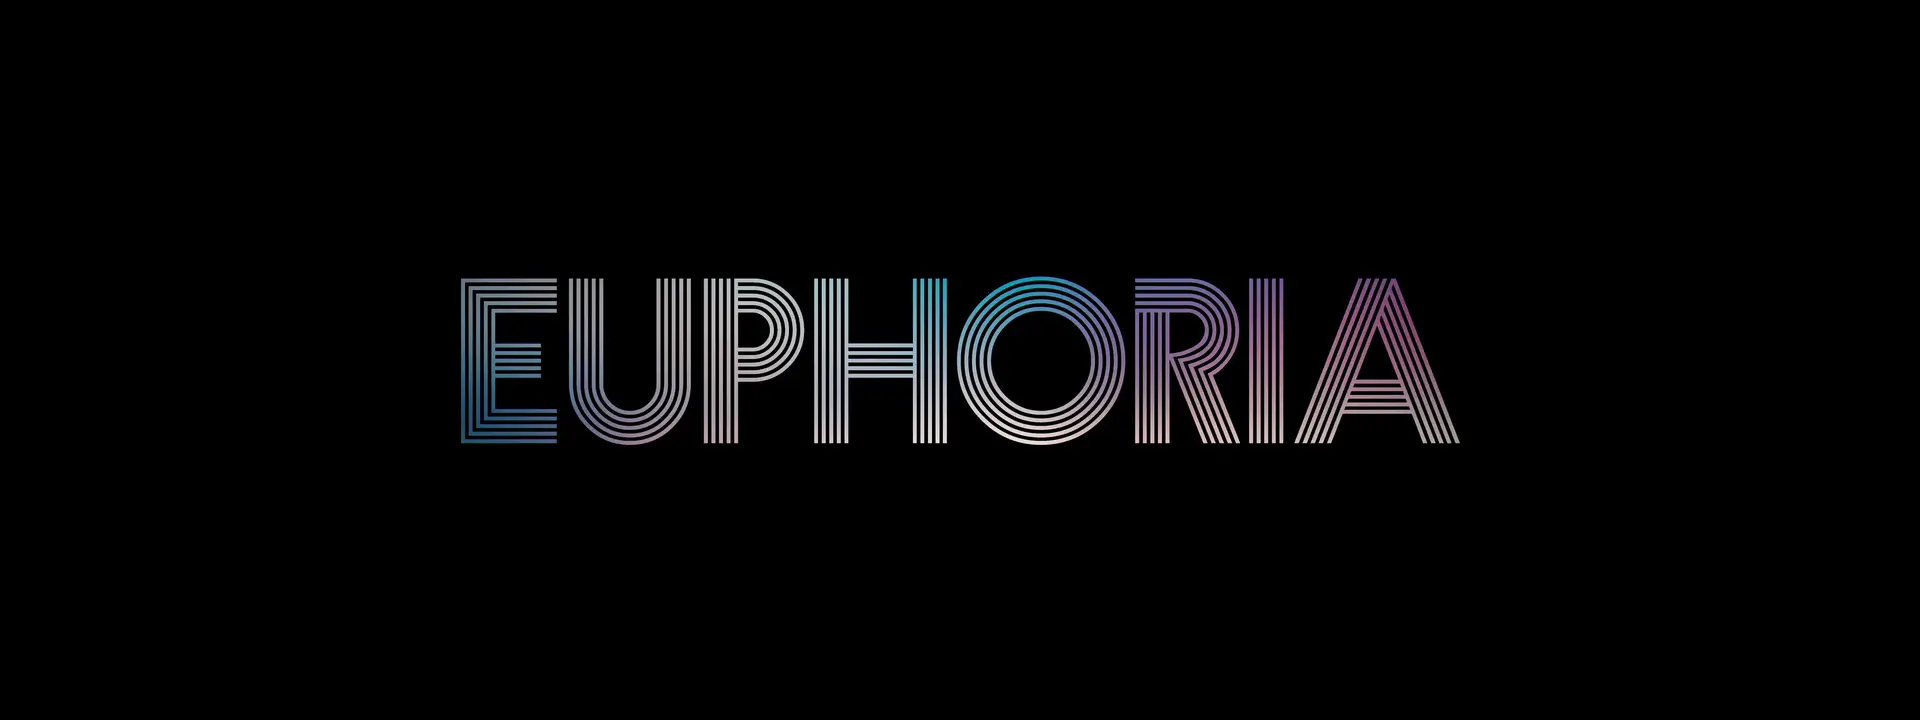 37 Euphoria Quotes by Maddy, Rue and Fez perfect for Instagram